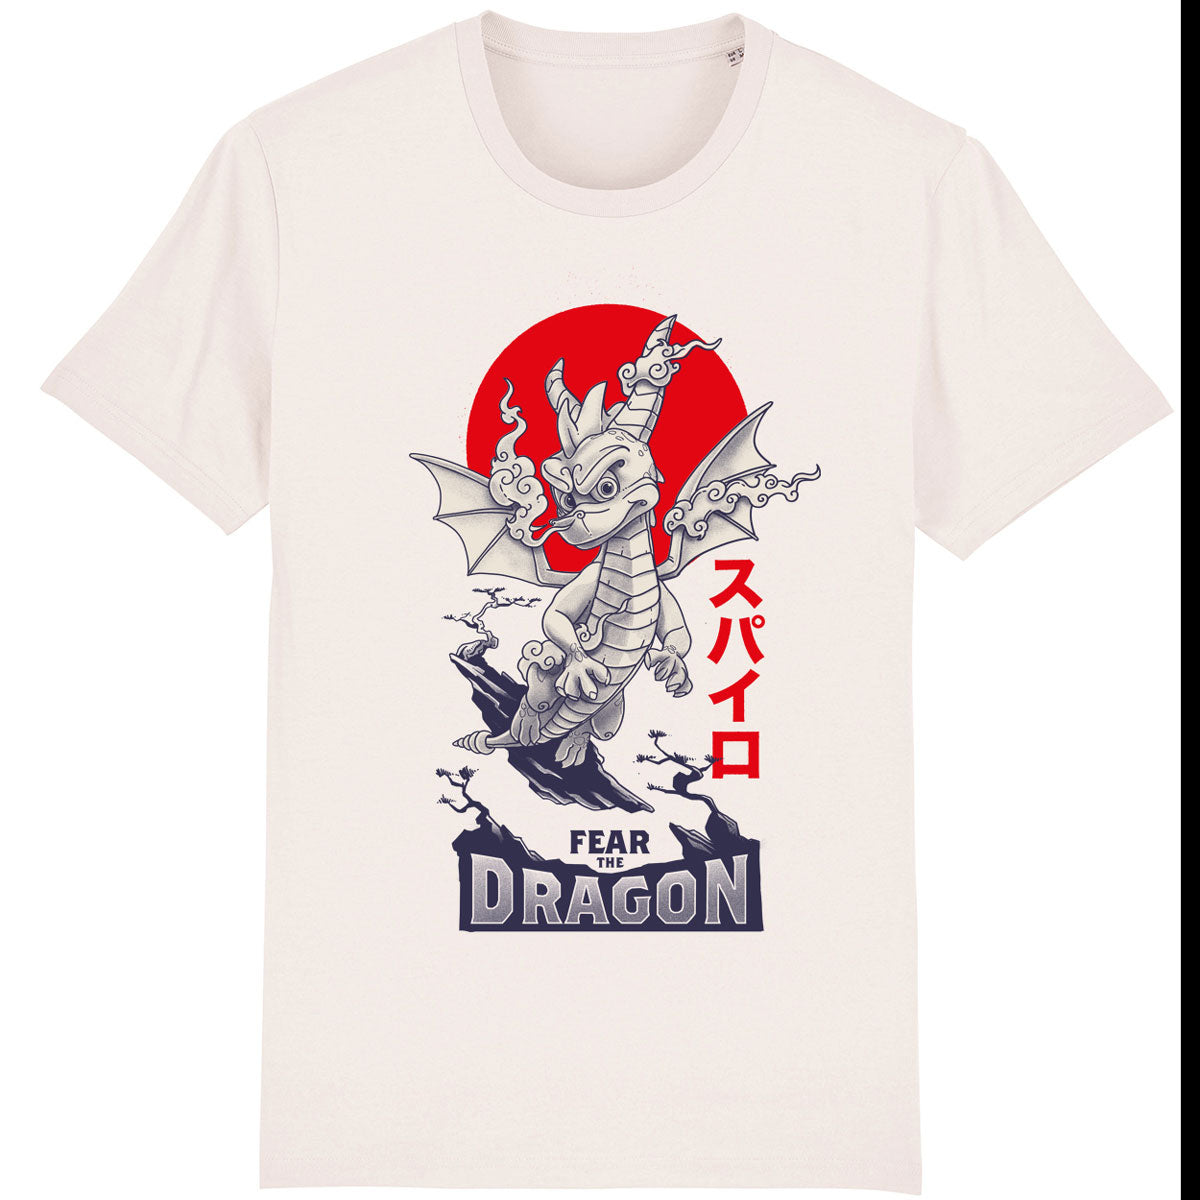 Spyro Fear The Dragon T-shirt with Japanese Rising Sun on White Crew Neck